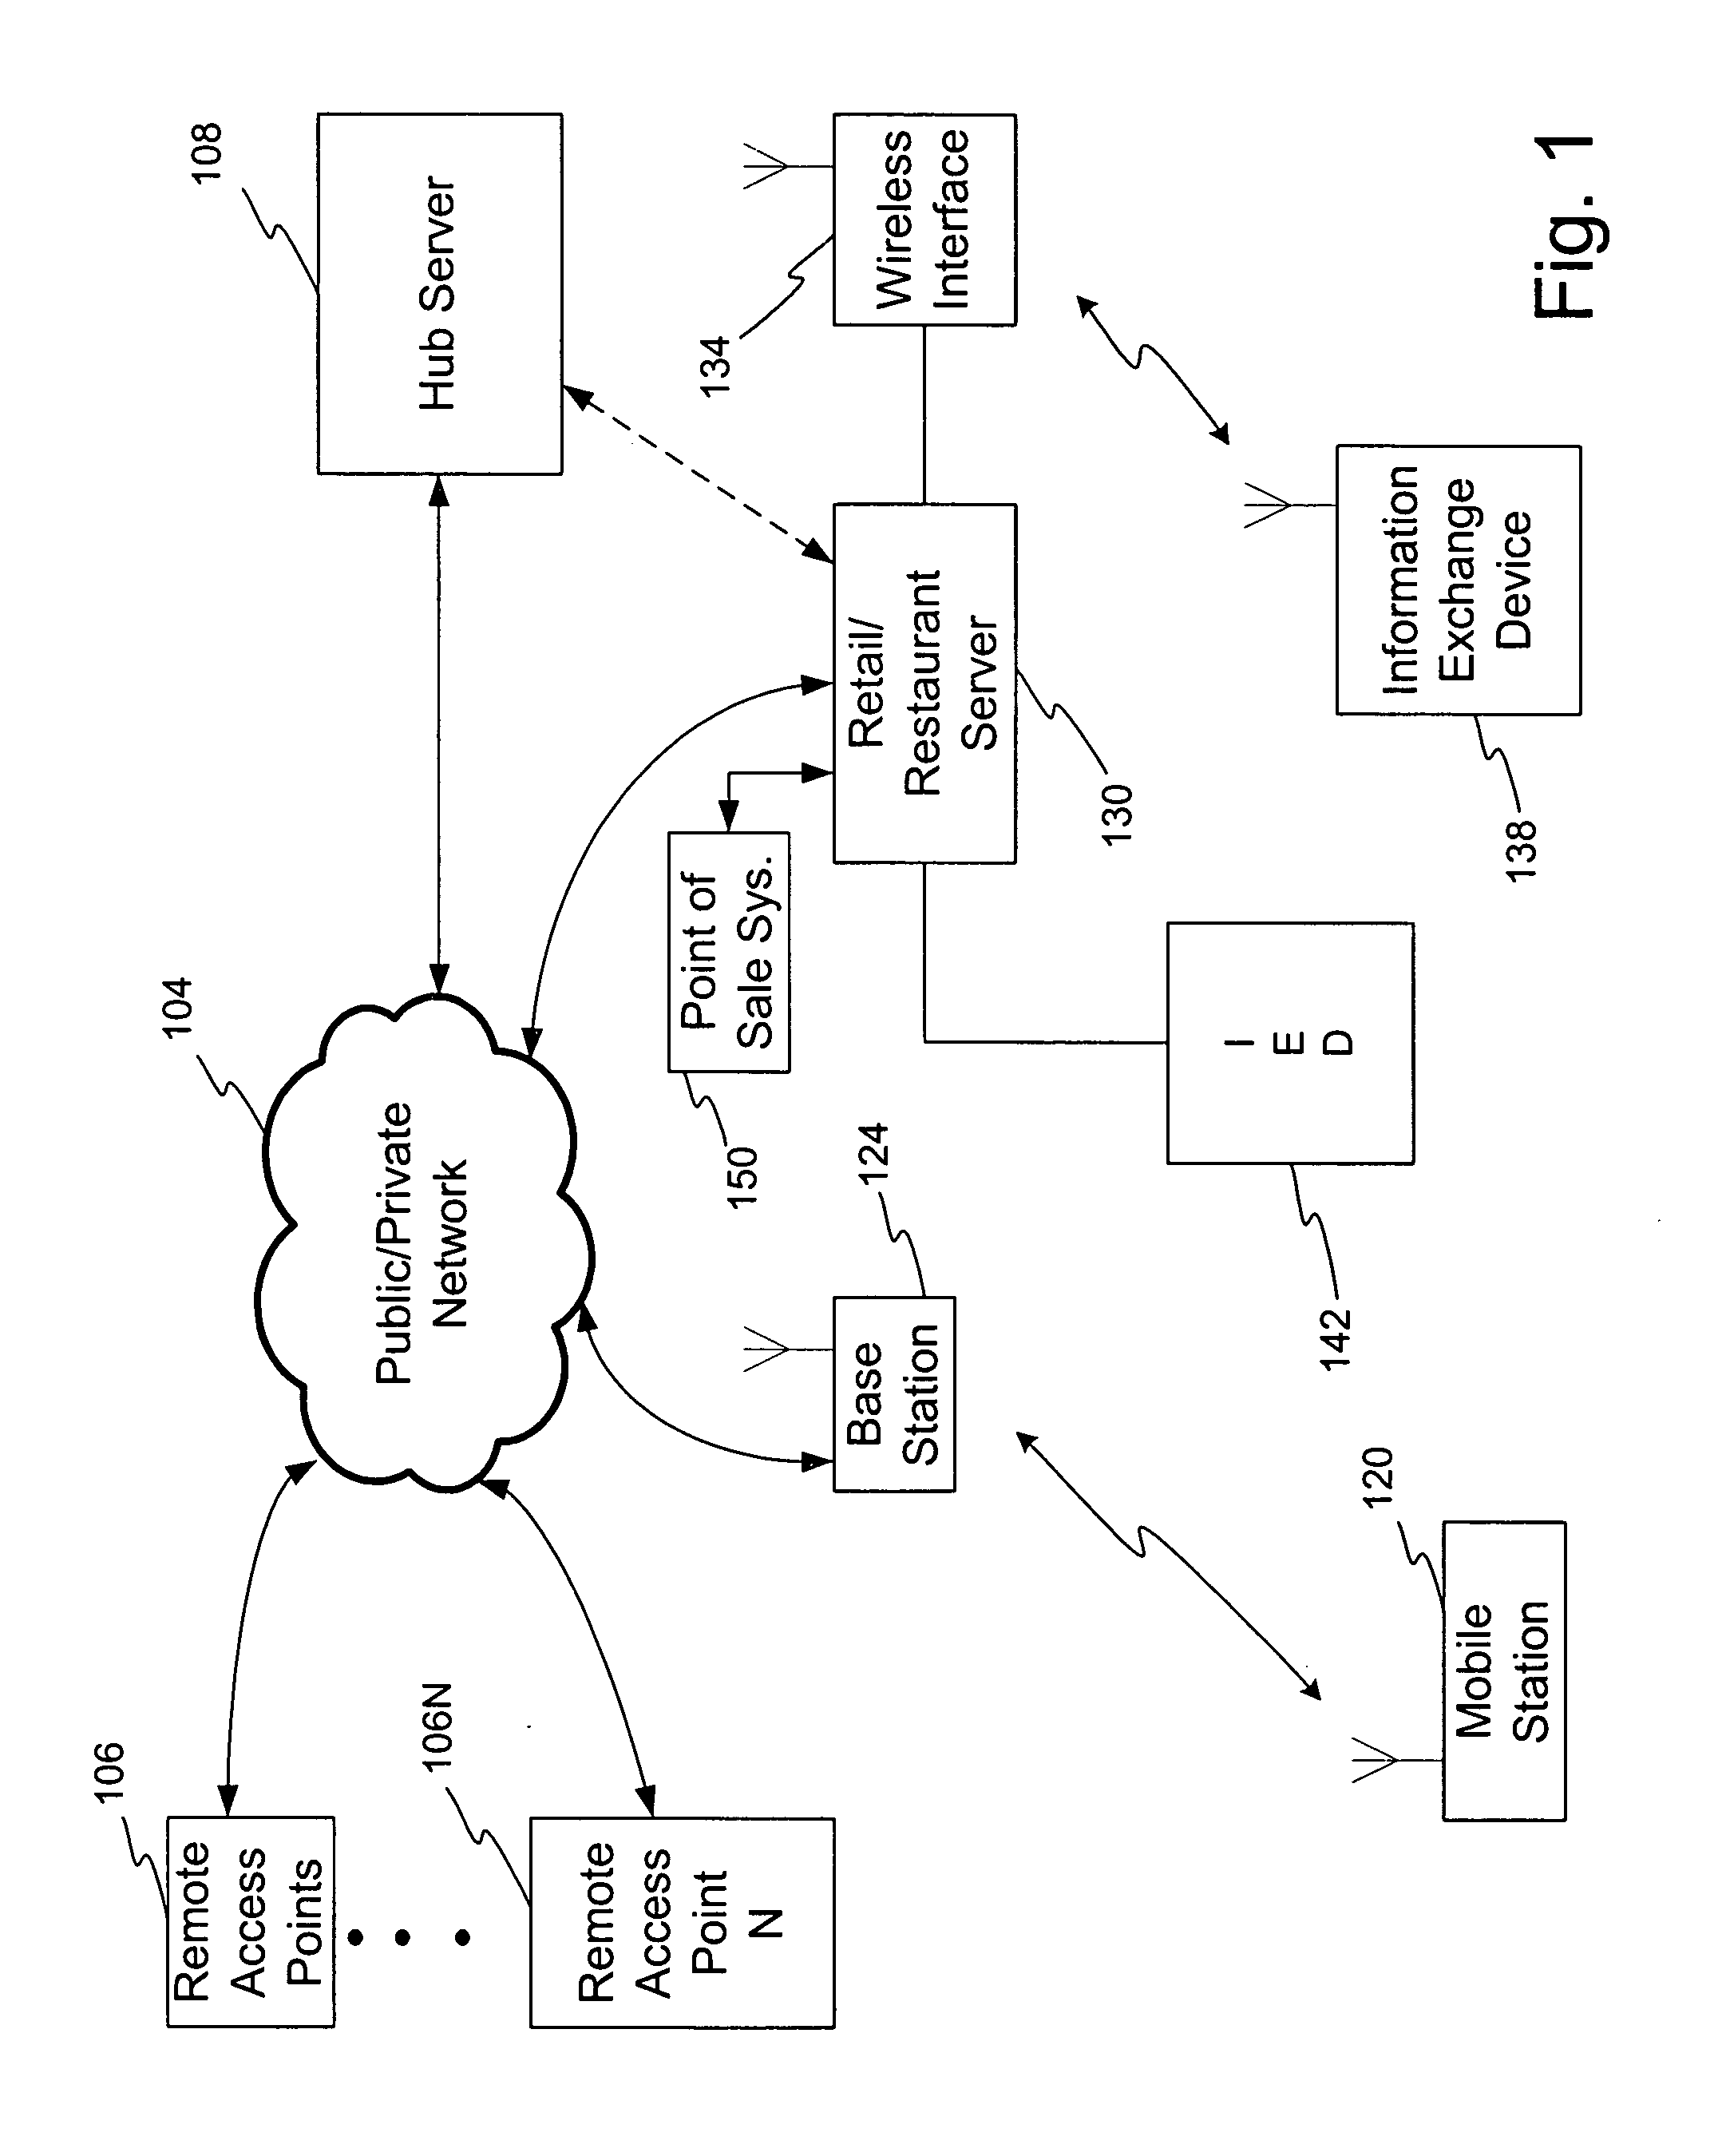 Portable data communication device with server interface